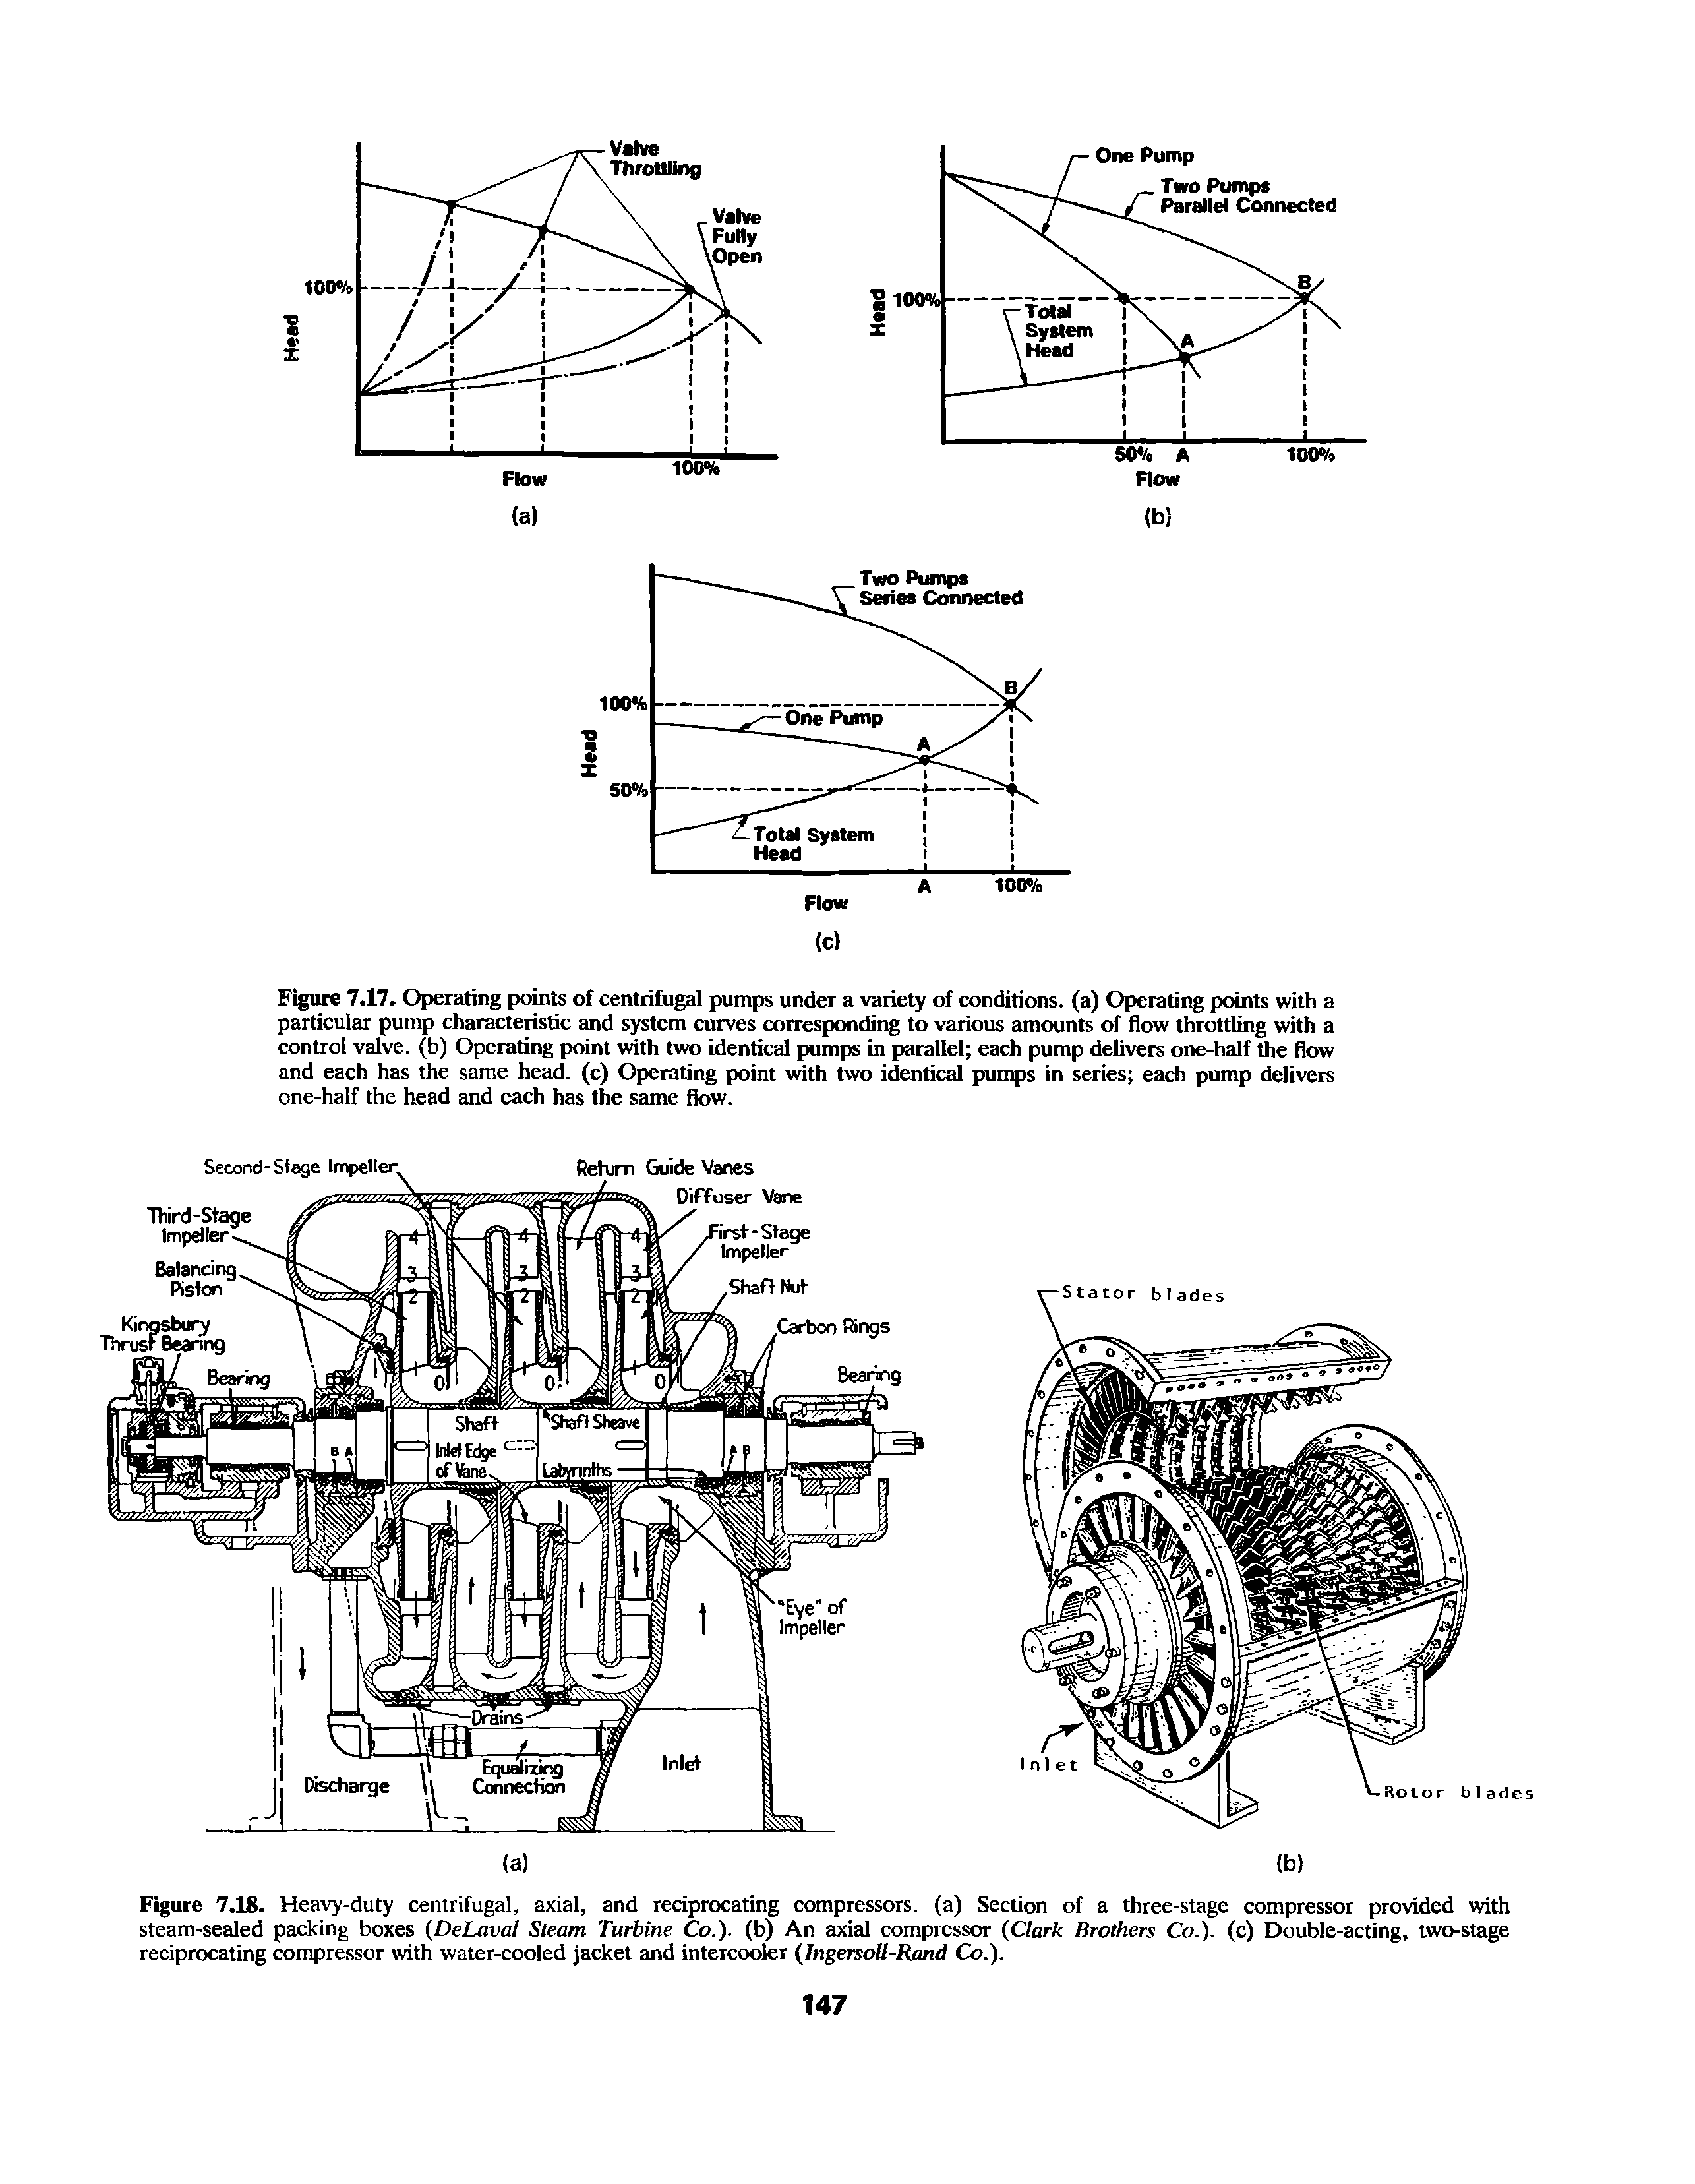 Figure 7.18. Heavy-duty centrifugal, axial, and reciprocating compressors, (a) Section of a three-stage compressor provided with steam-sealed packing boxes (DeLaval Steam Turbine Co.), (b) An axial compressor (Clark Brothers Co.), (c) Double-acting, two-stage reciprocating compressor with water-cooled jacket and intercooler (Ingersoll-Rand Co.).